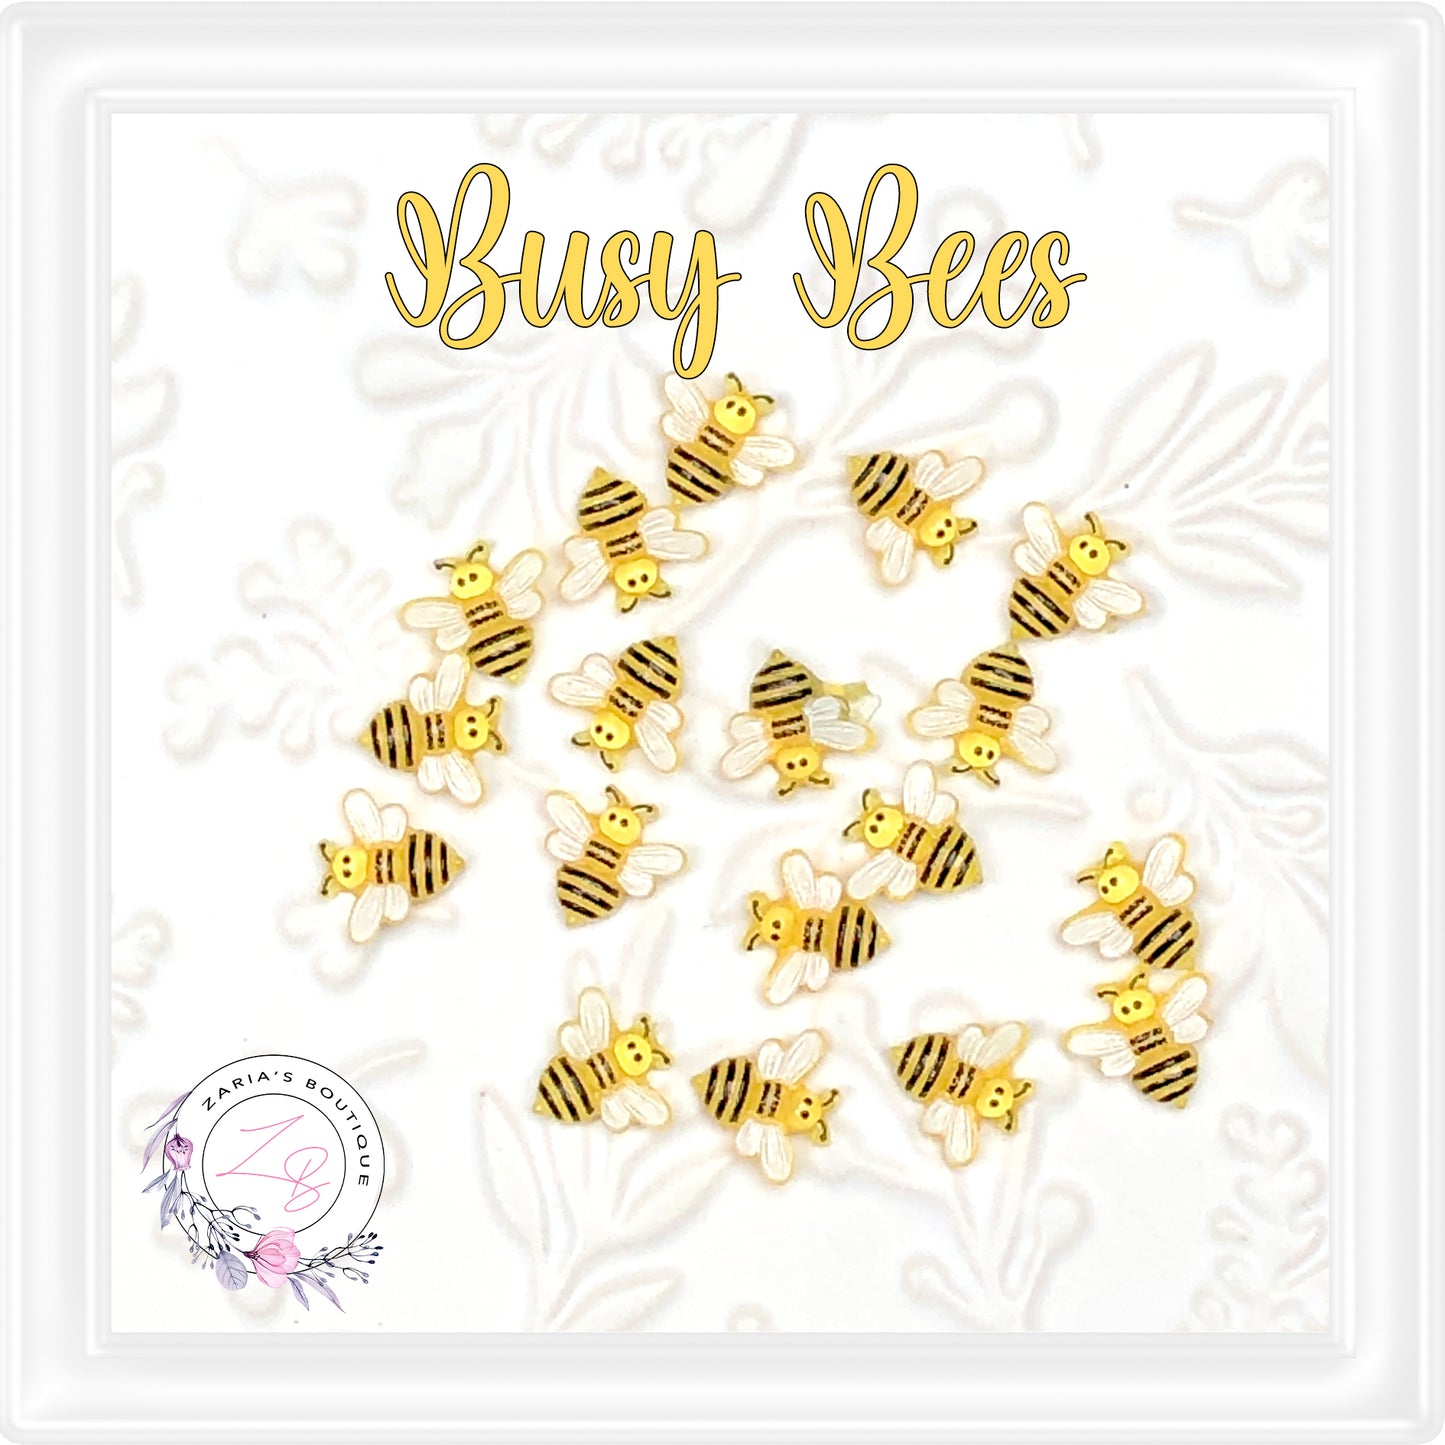 ⋅ BUSY BEES ⋅ Mini Flatback Resin Embellishments ⋅ 10 Pieces